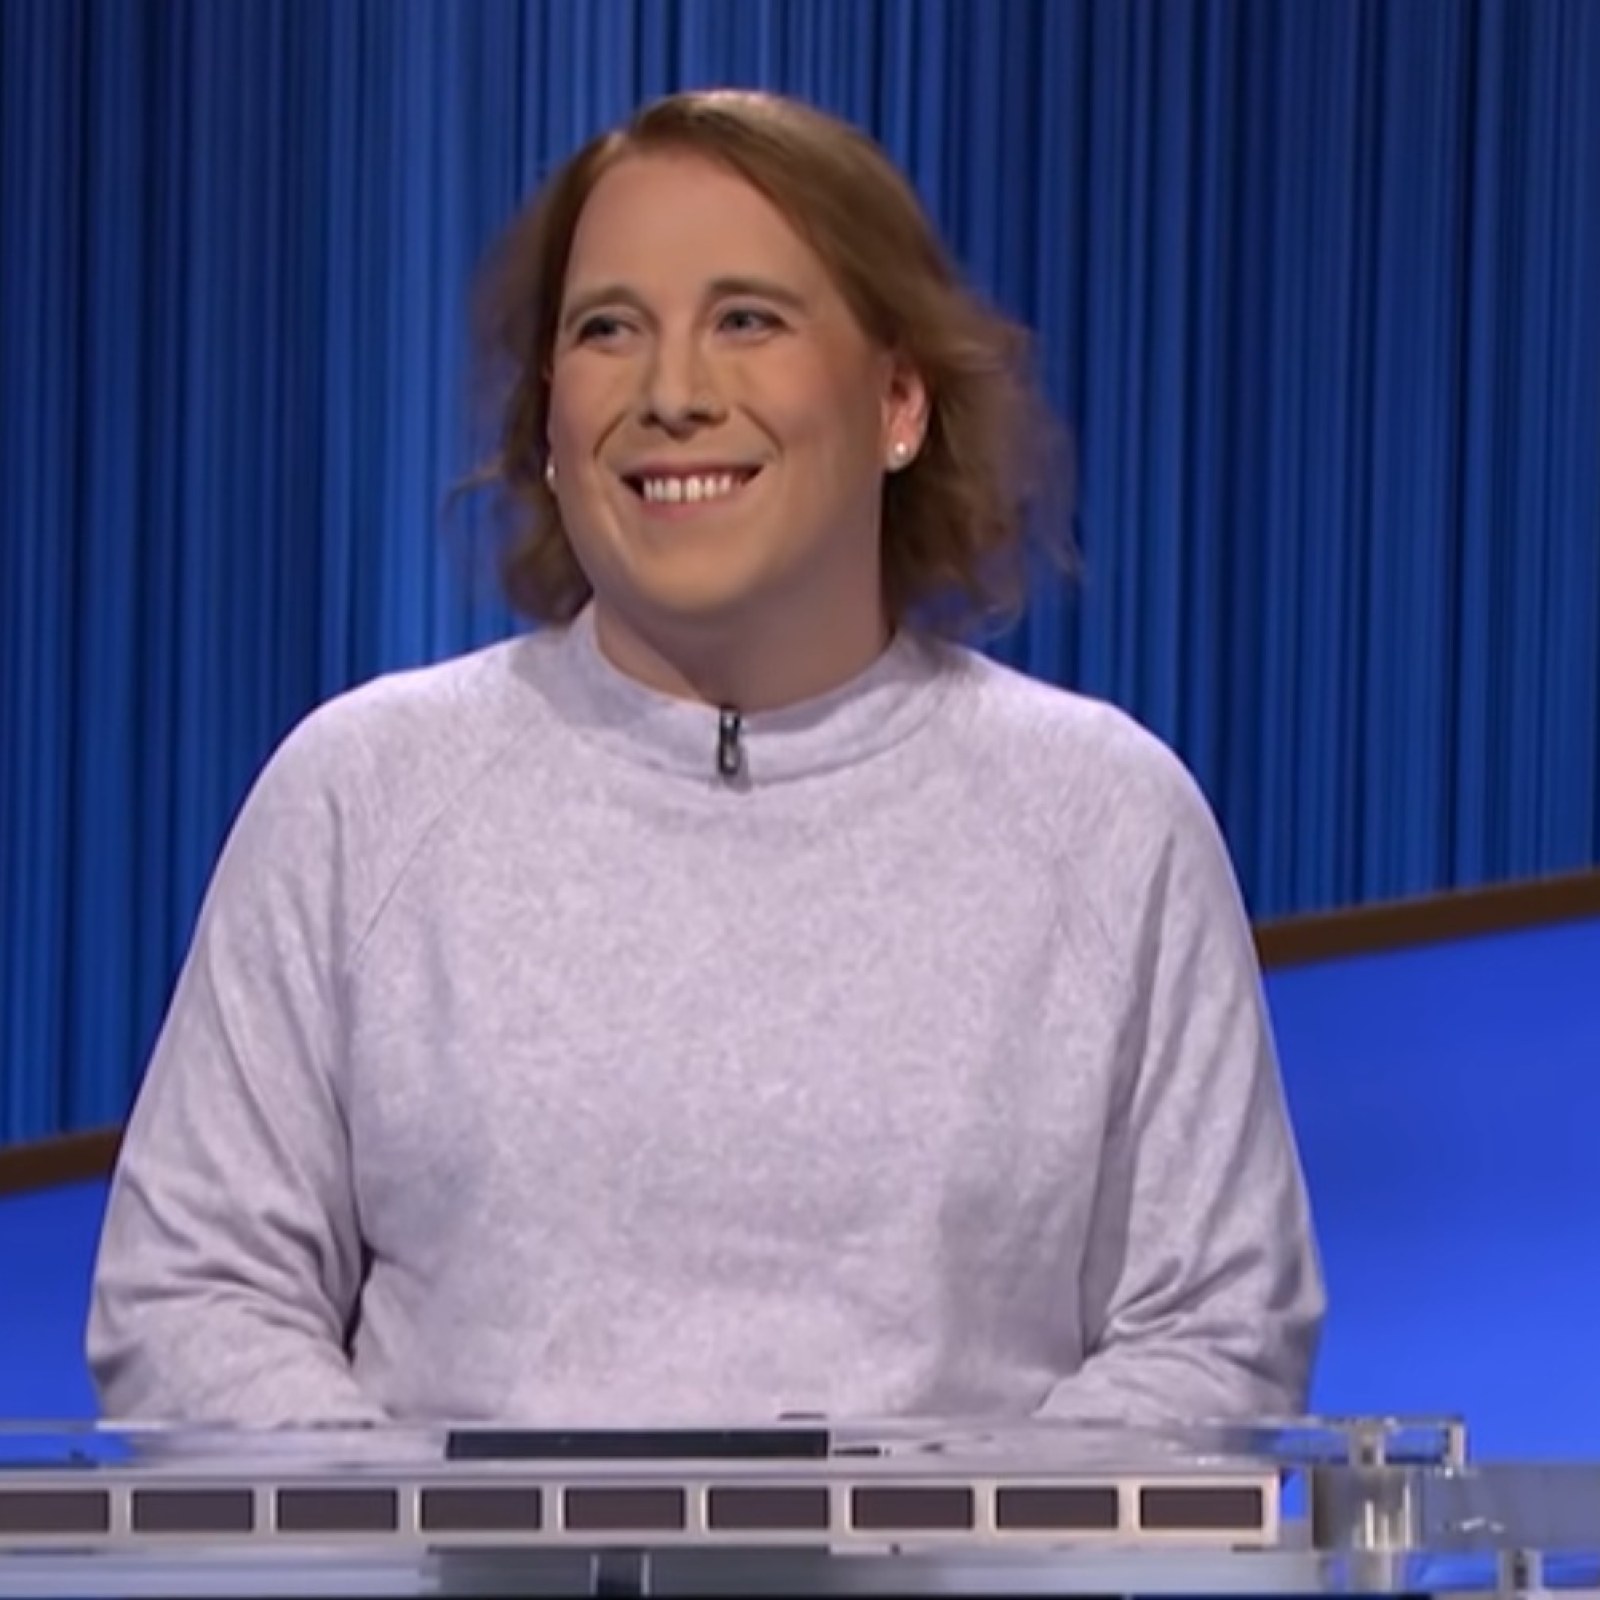 Amy Schneider Beats Family Record As Her 'Jeopardy!' Win Streak Continues